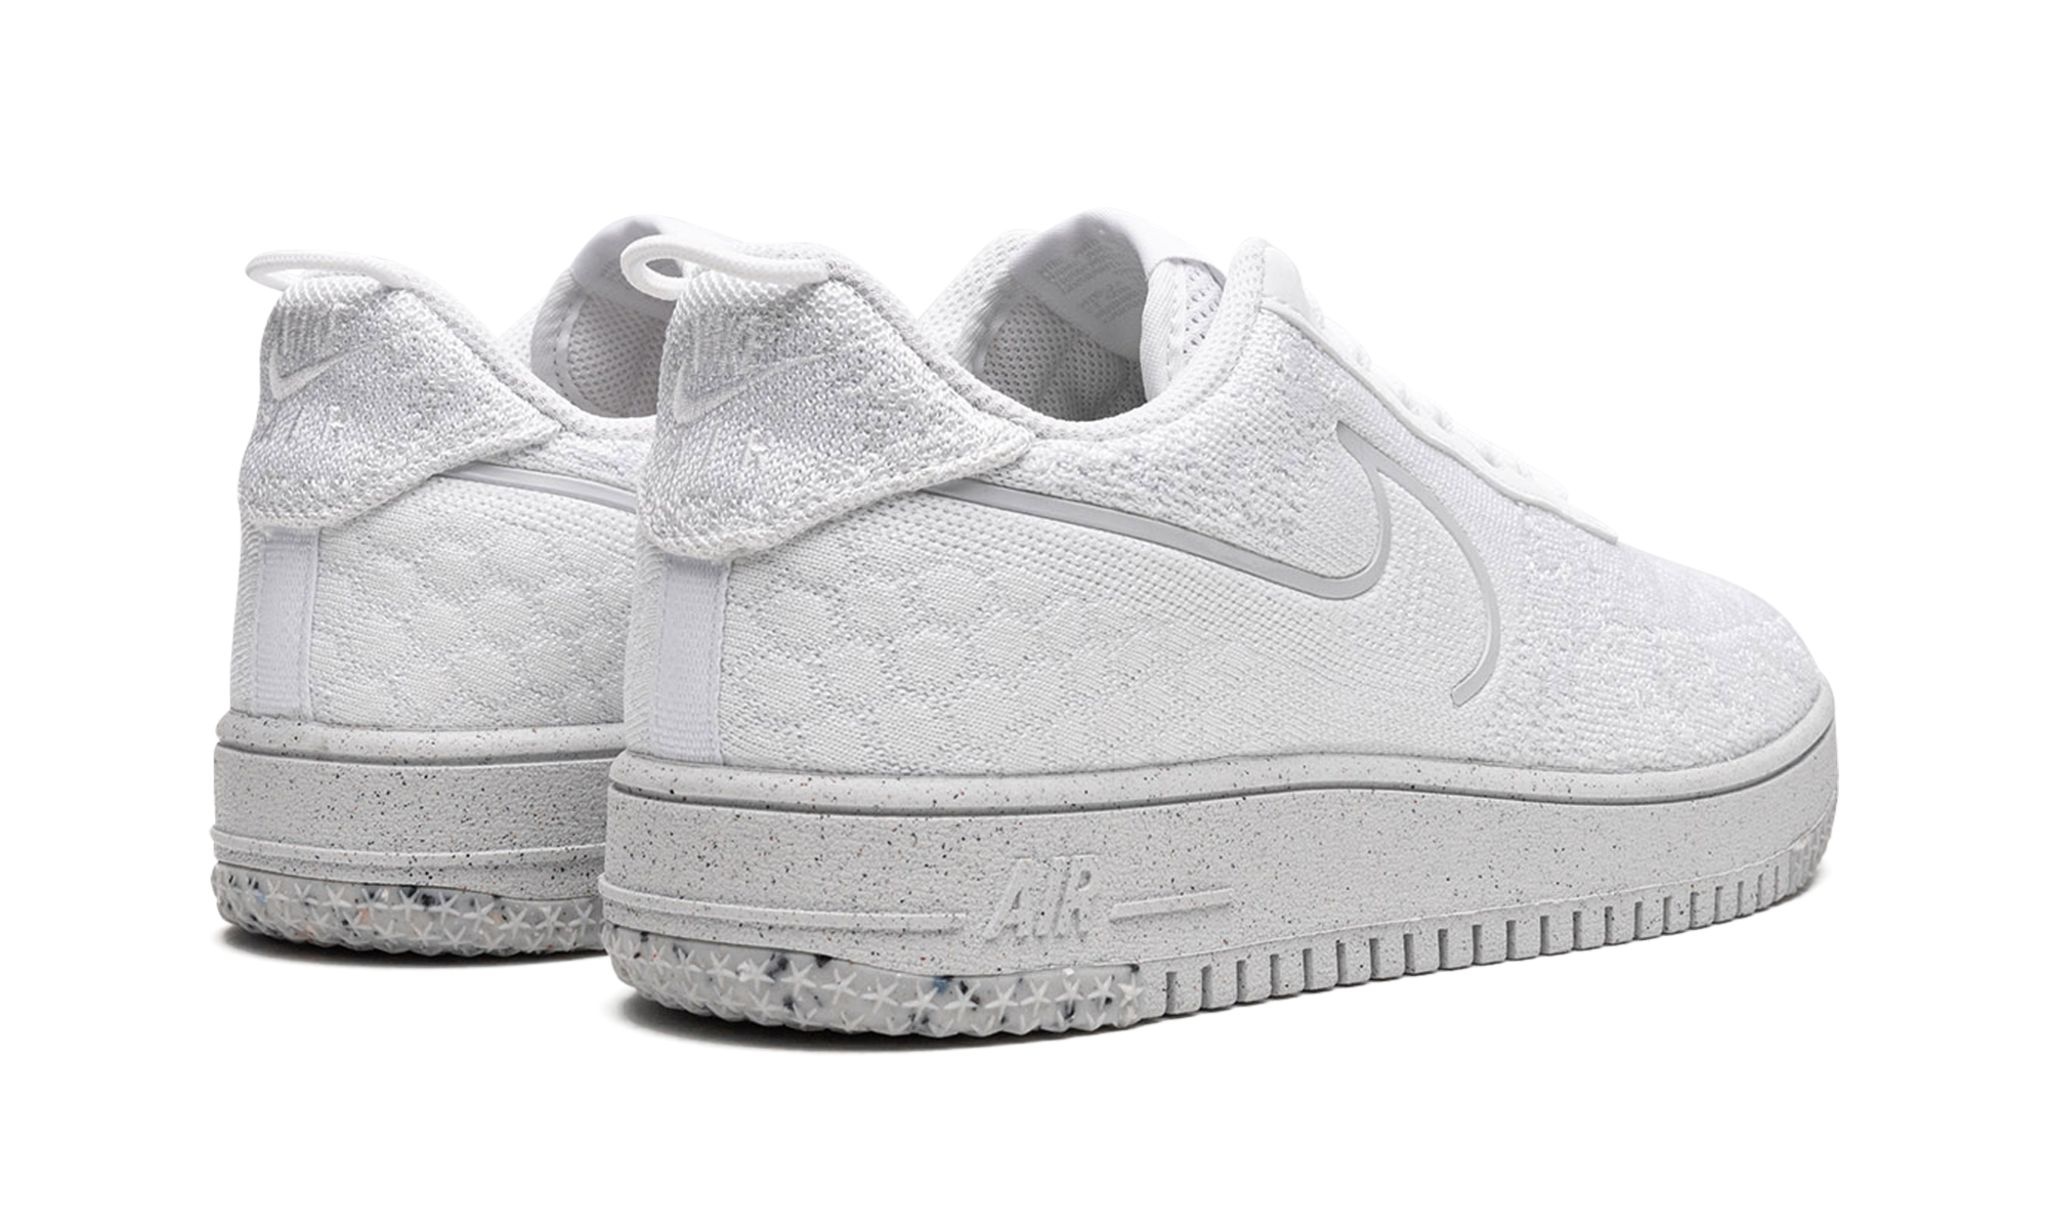 AF1 CRATER FLYKNIT NN "Whiteout" - 3